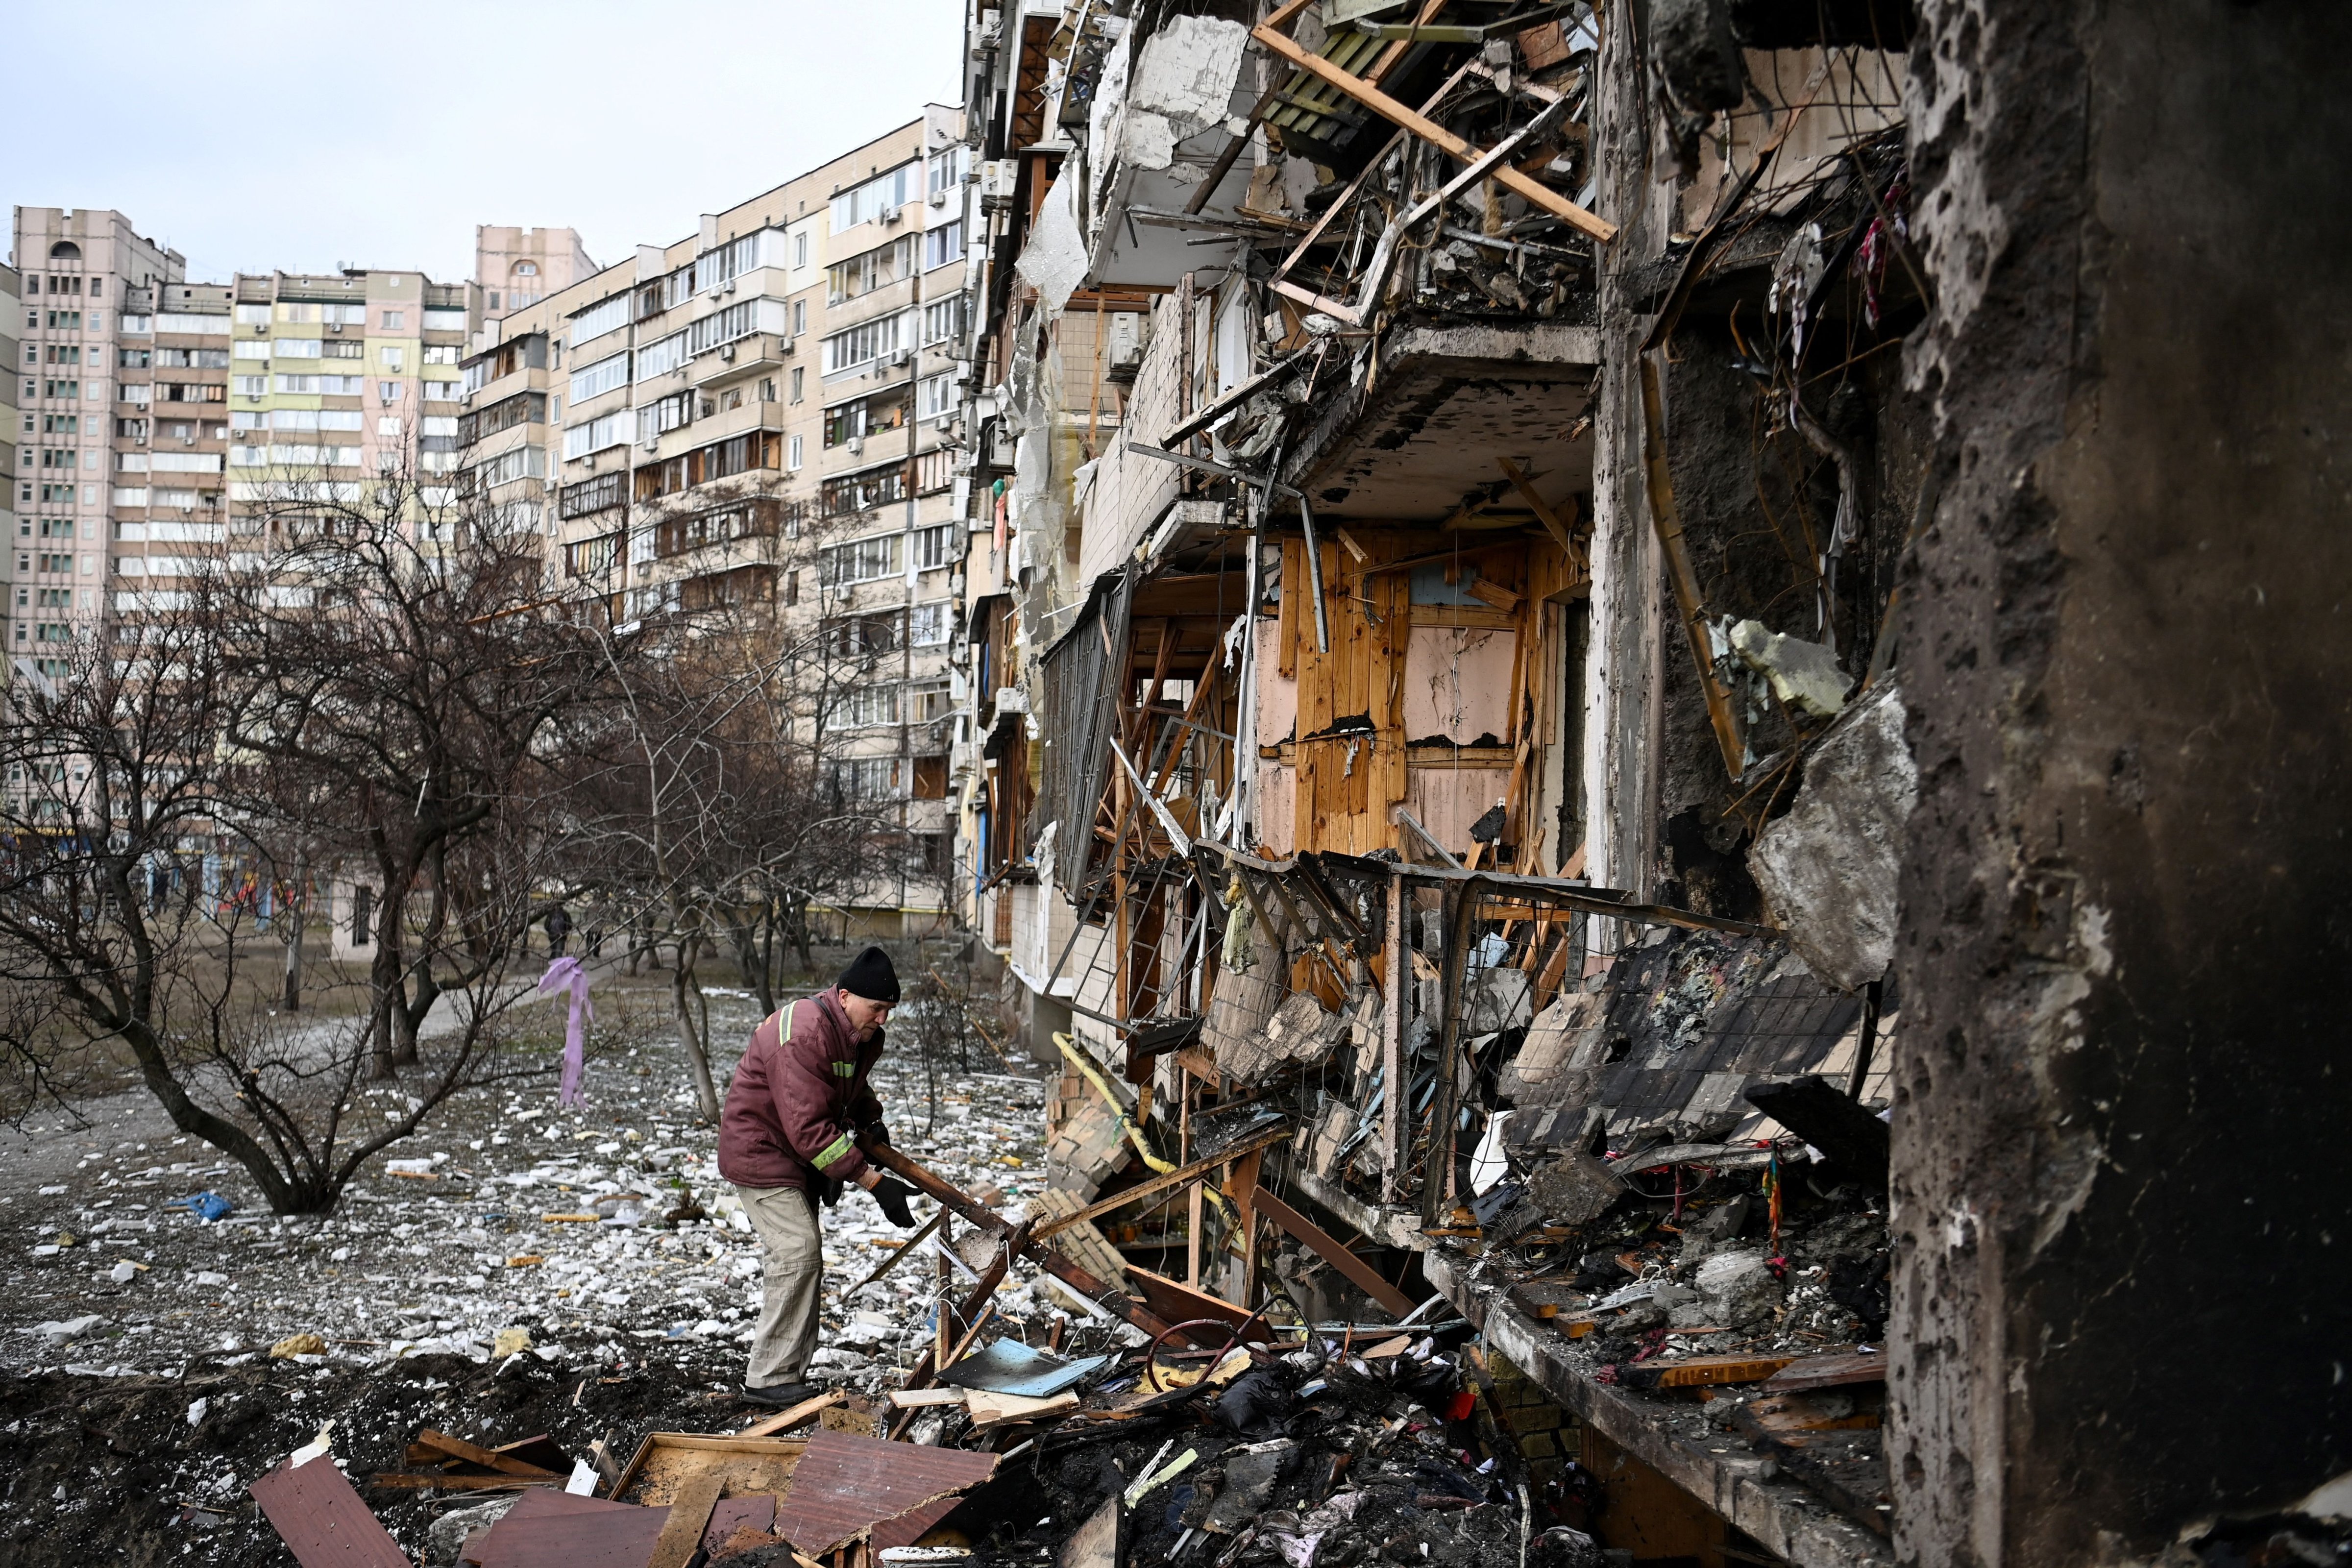 A man clears debris at a damaged residential building at a suburb of the Ukrainian capital Kyiv. (Daniel Leal—AFP/Getty Images)